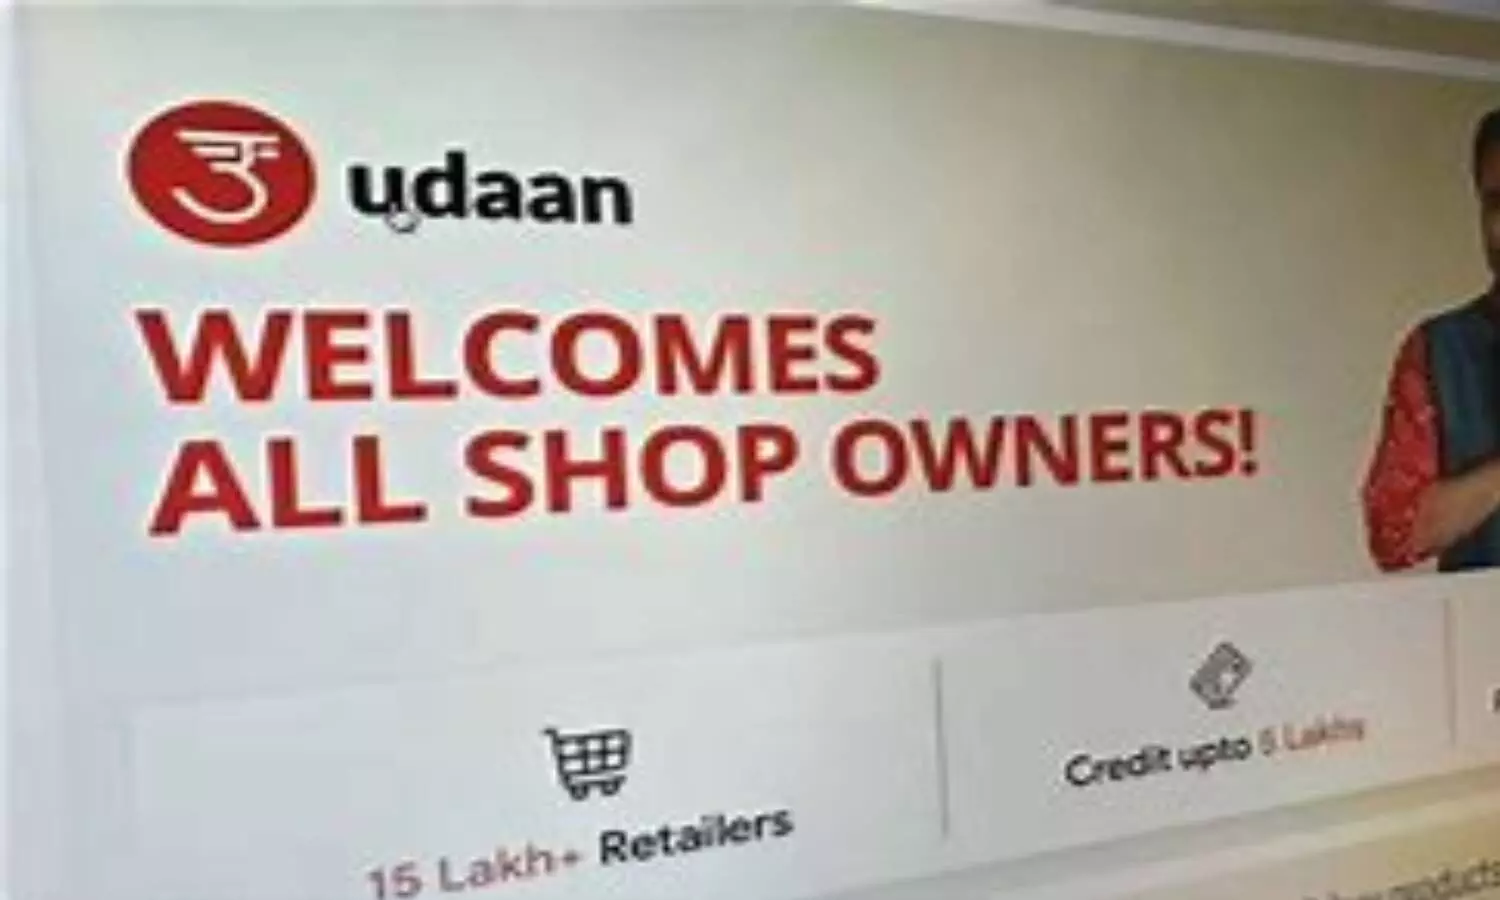 Udaan adopts formal CEO structure as it explores possibility of going public